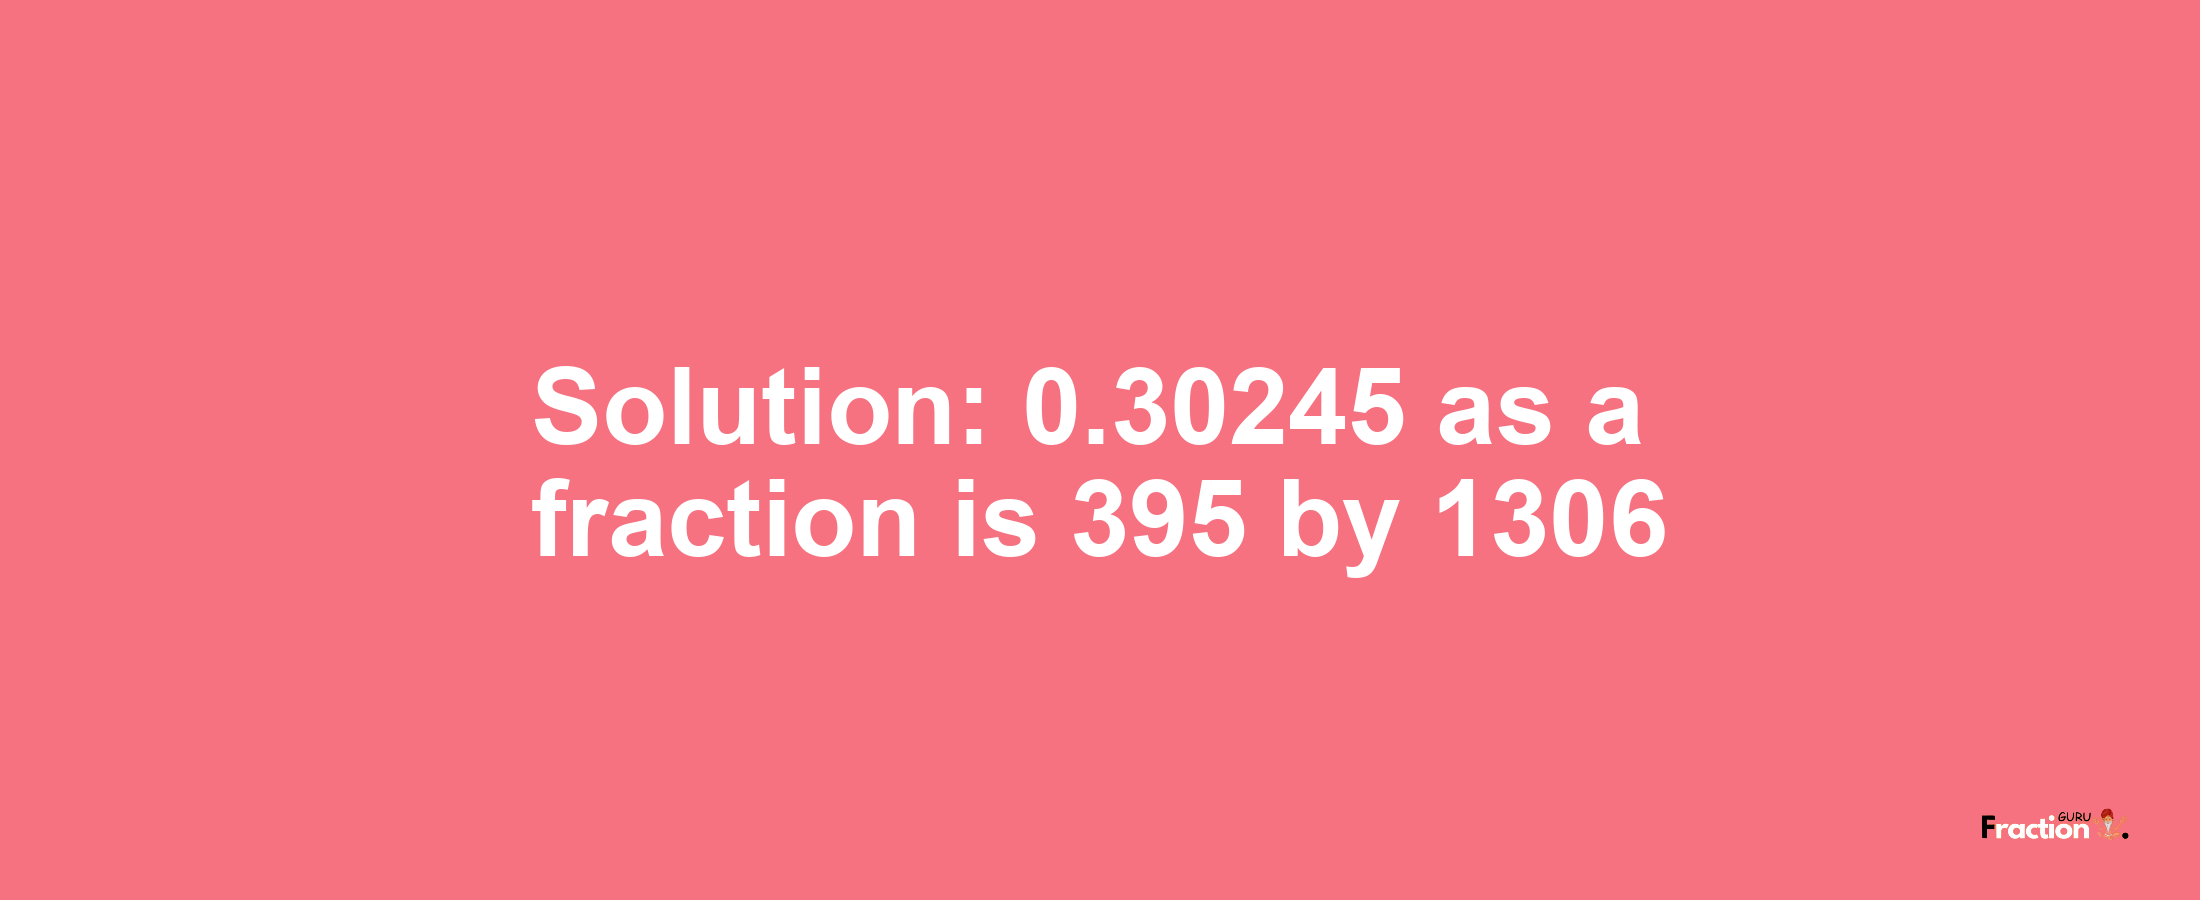 Solution:0.30245 as a fraction is 395/1306